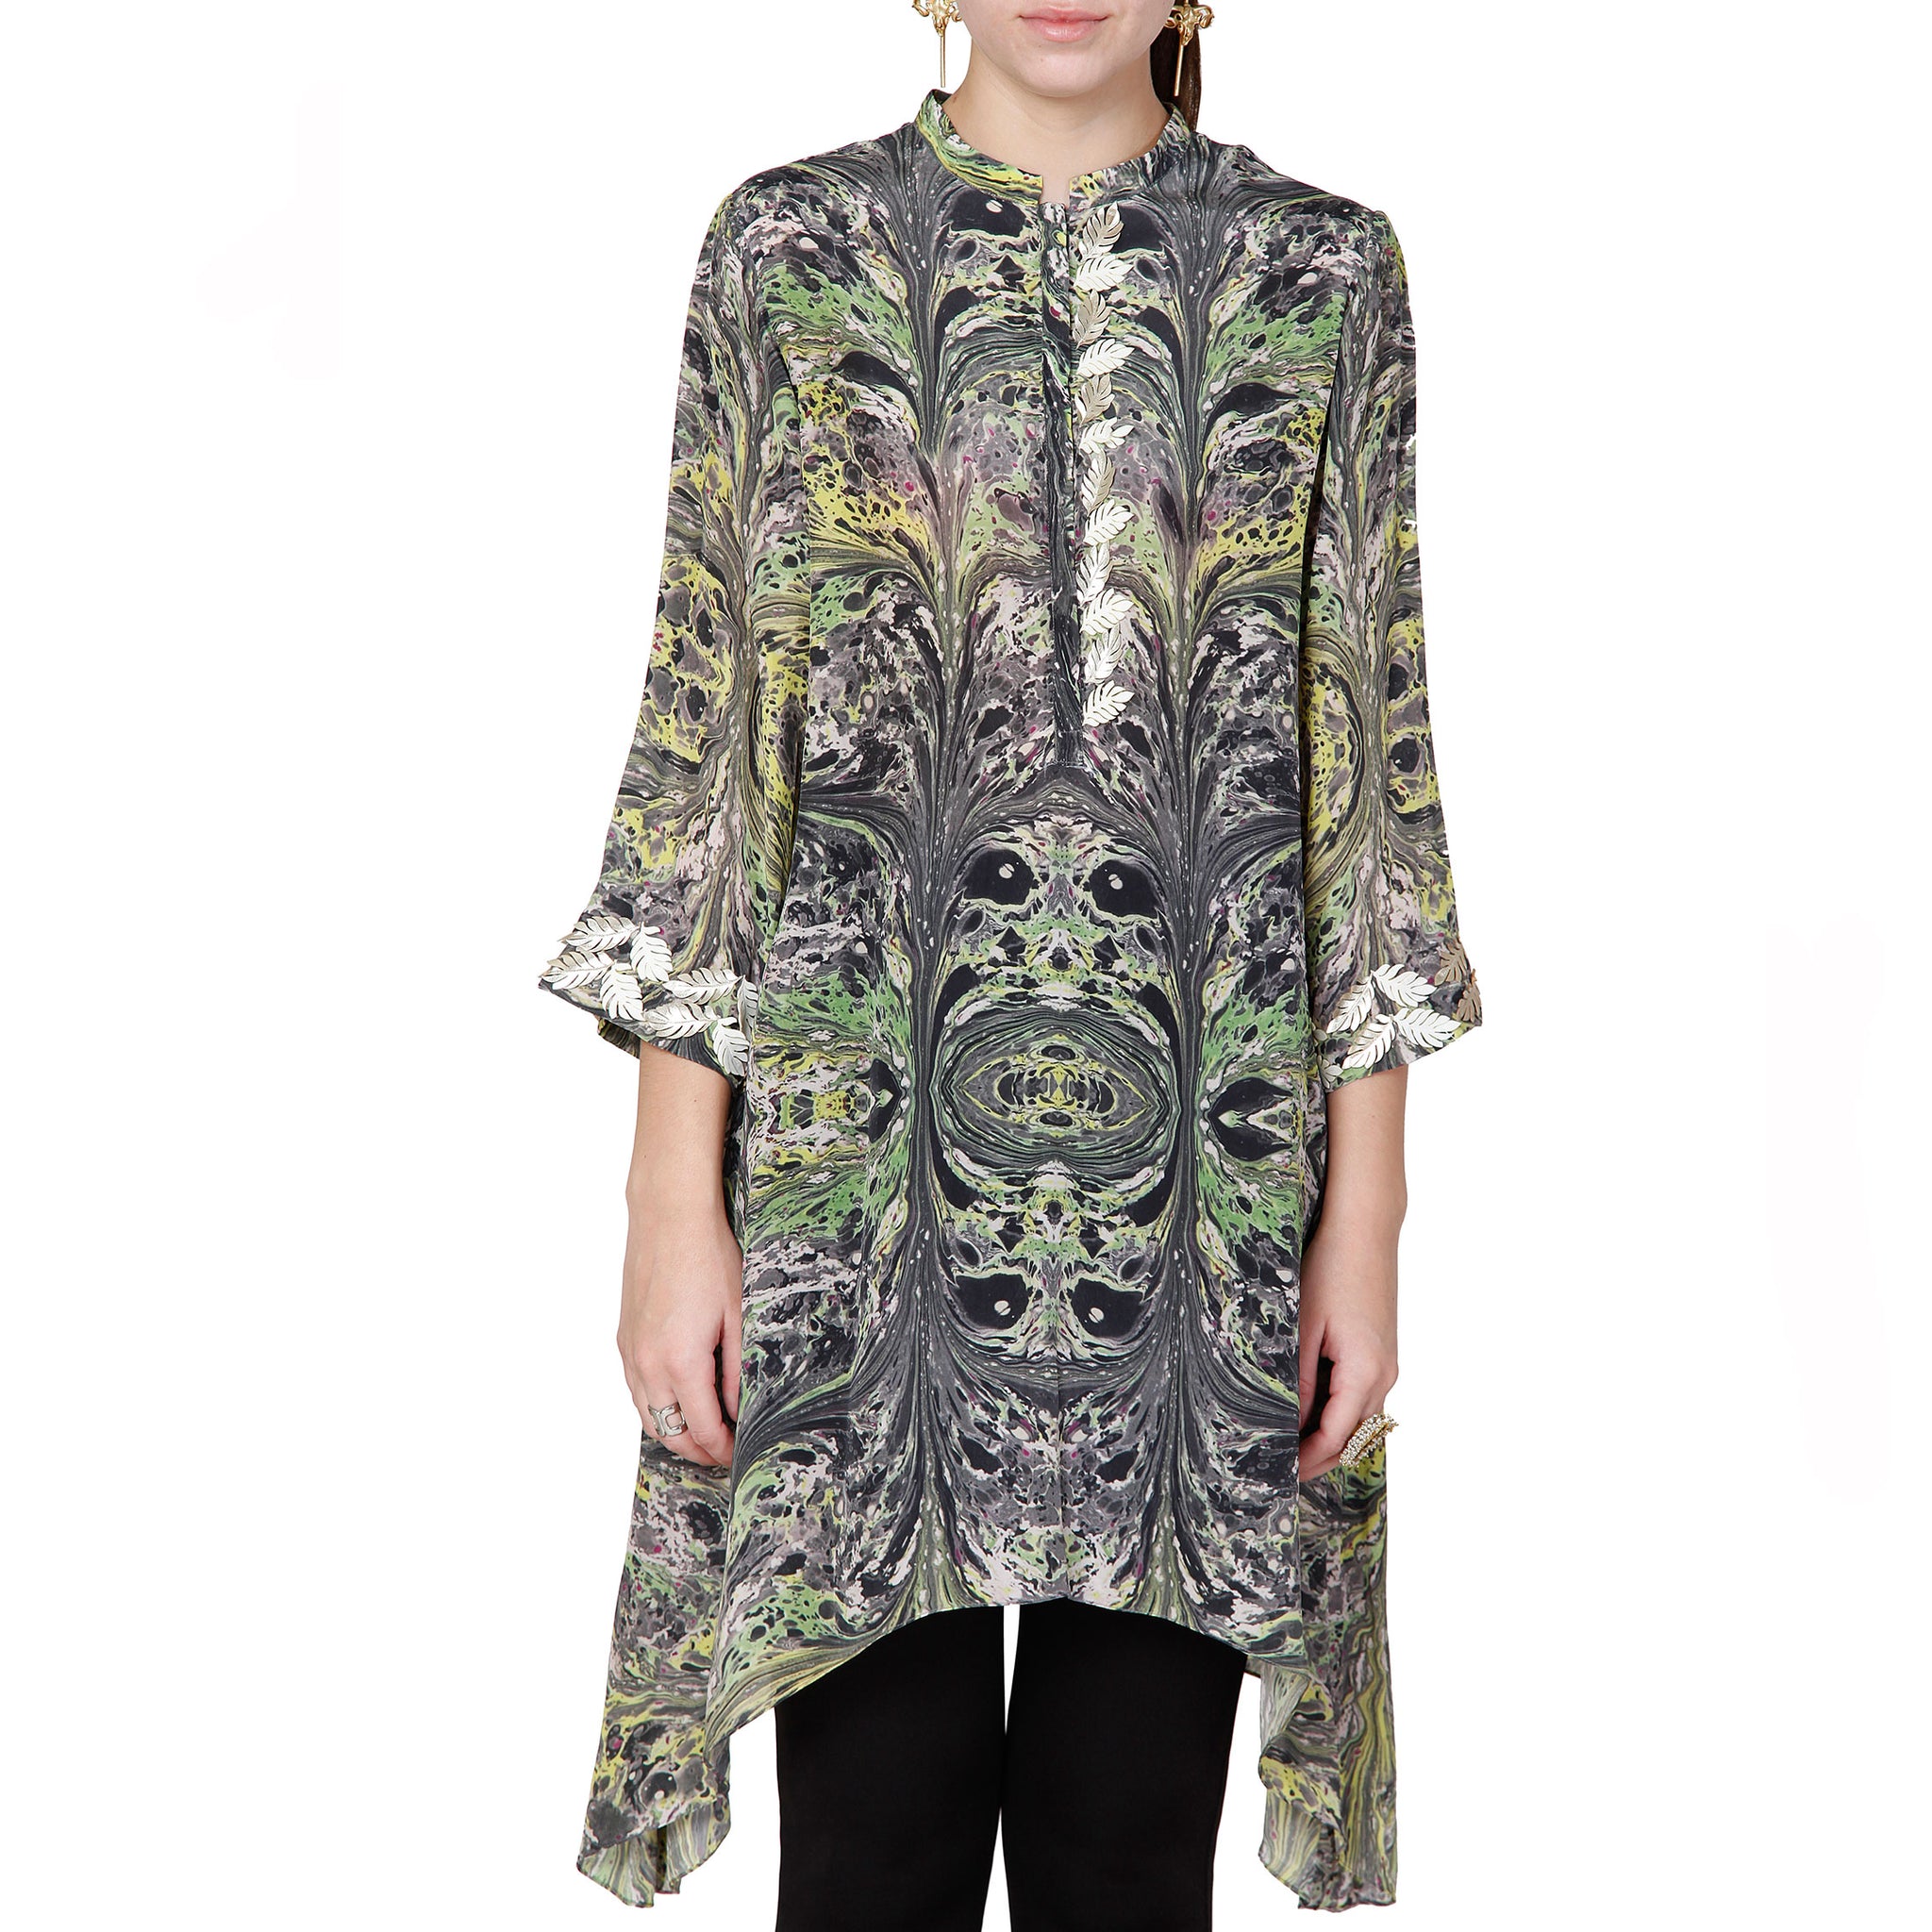 Asymmetric Tunic with Cut-work Embroidery